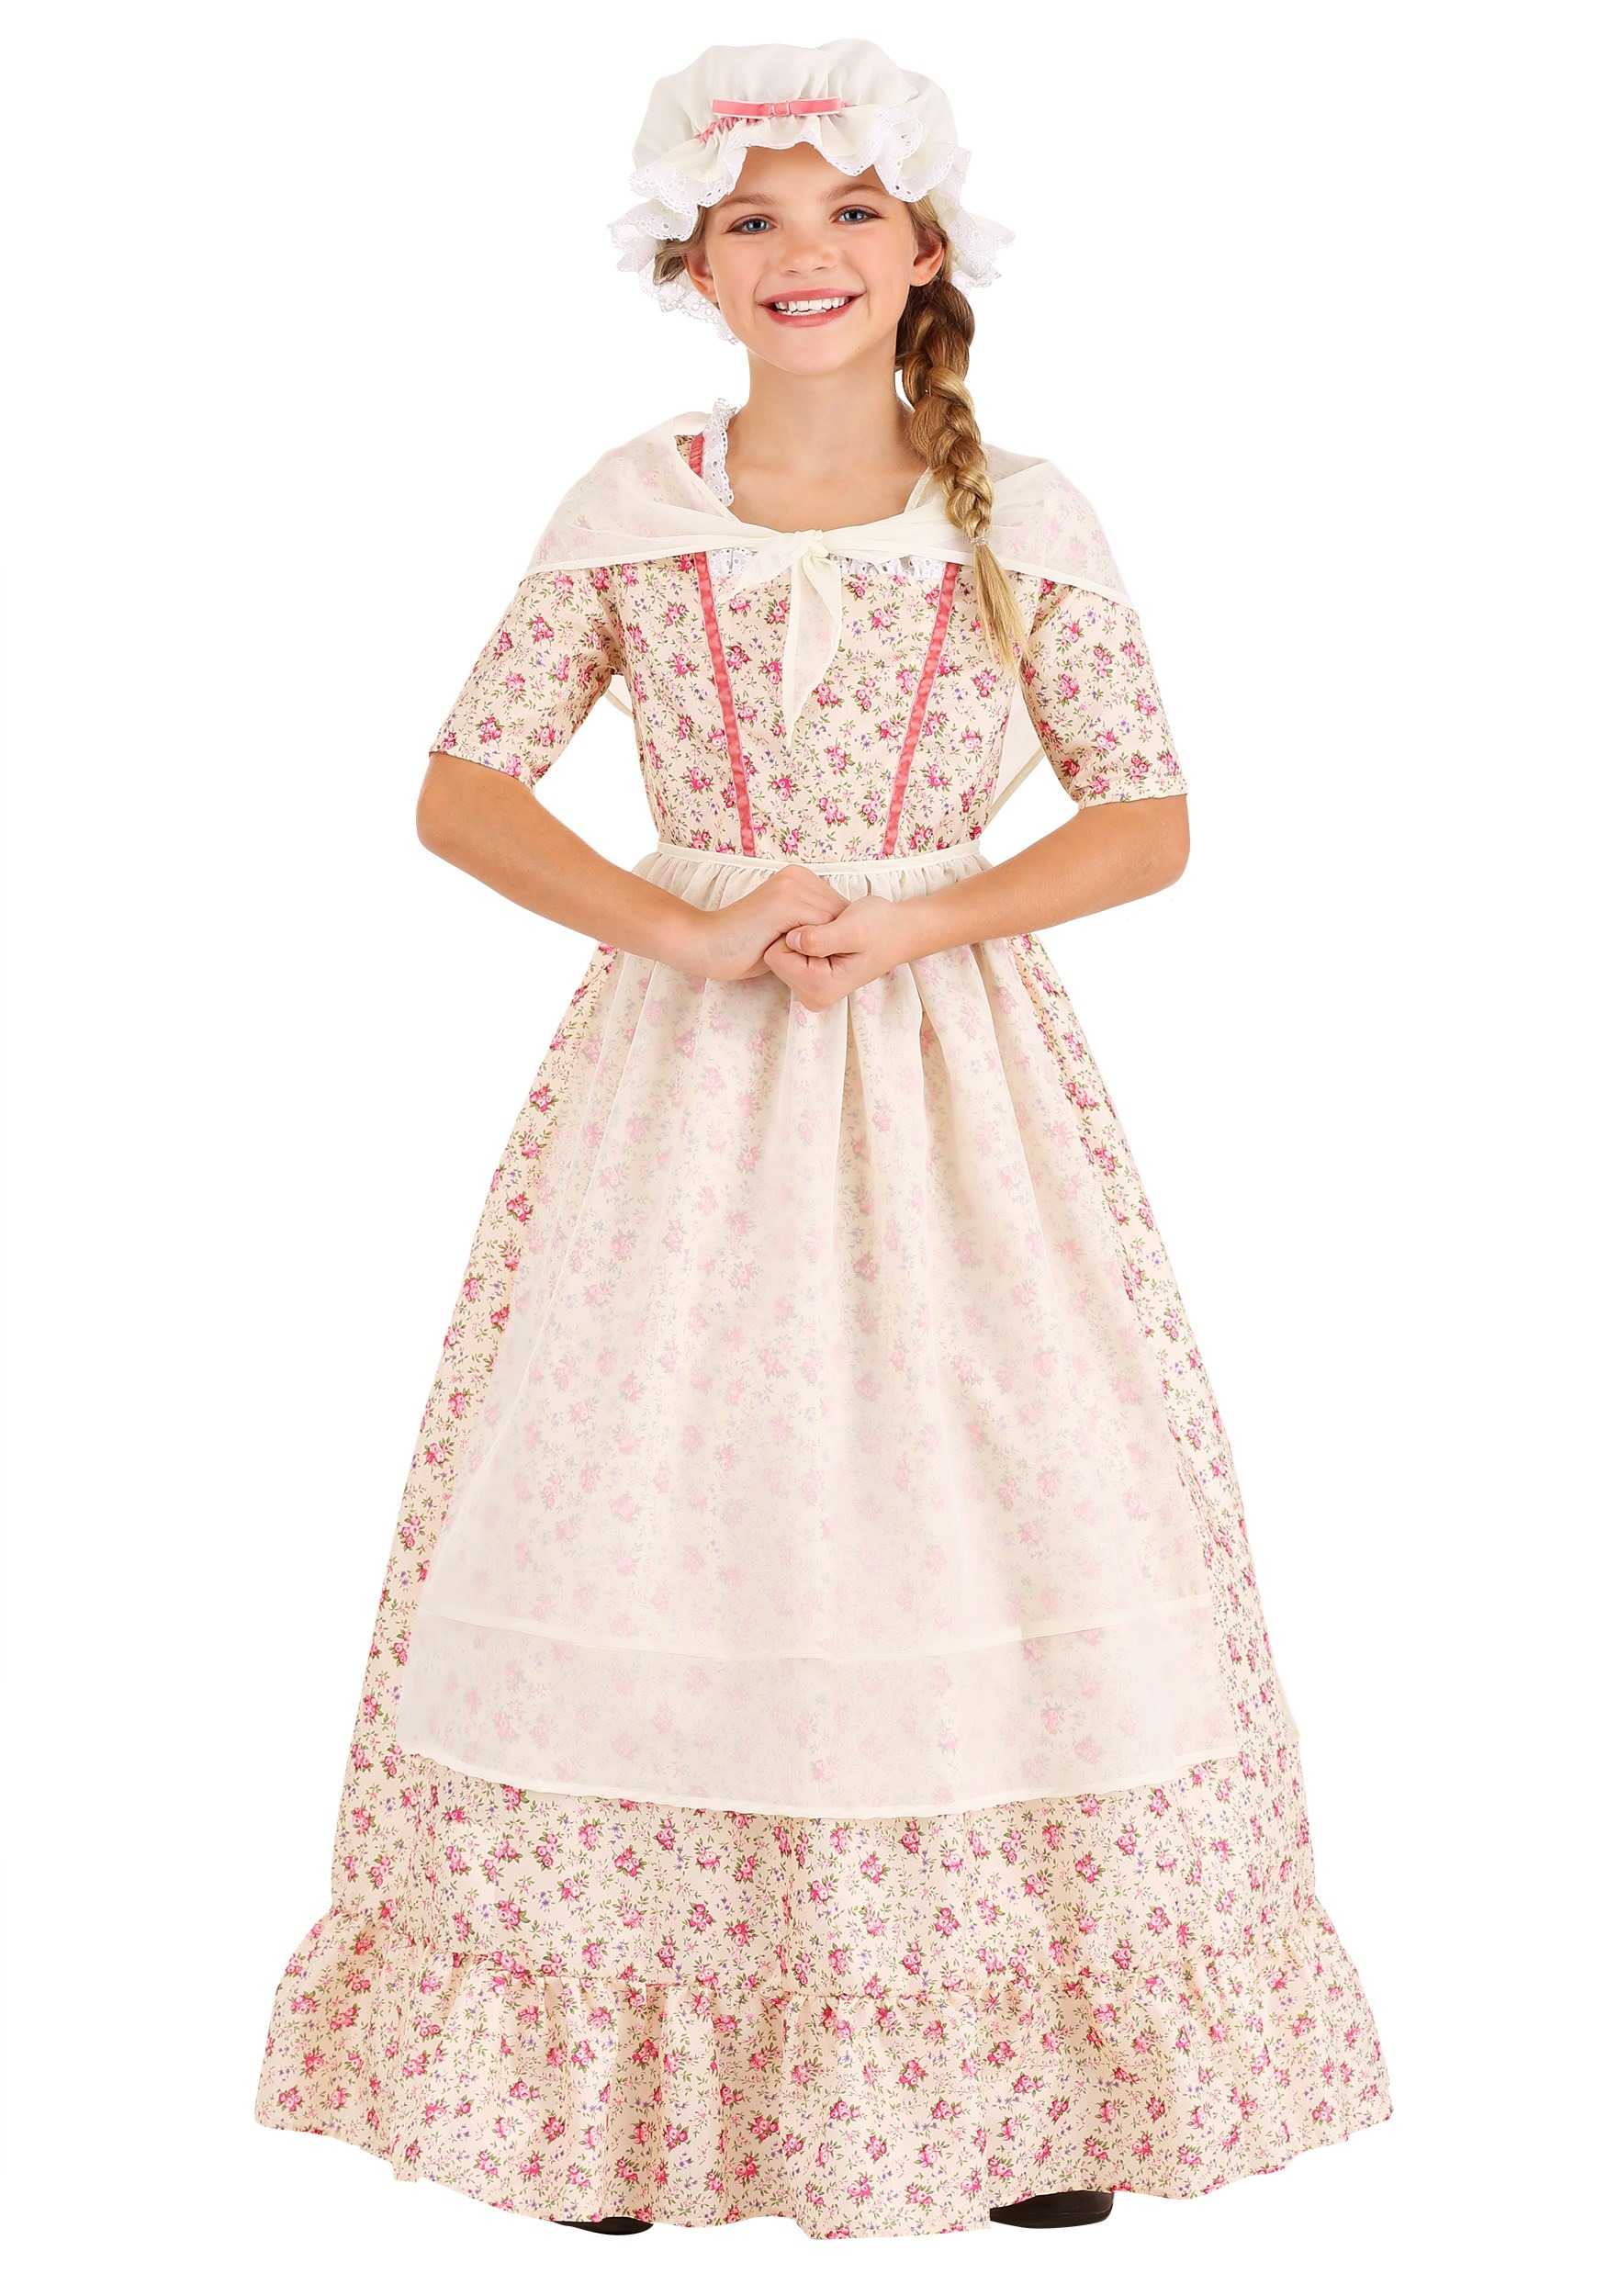 Photos - Fancy Dress FUN Costumes Child Colonial Girl Costume | Historical Costumes Pink/Wh